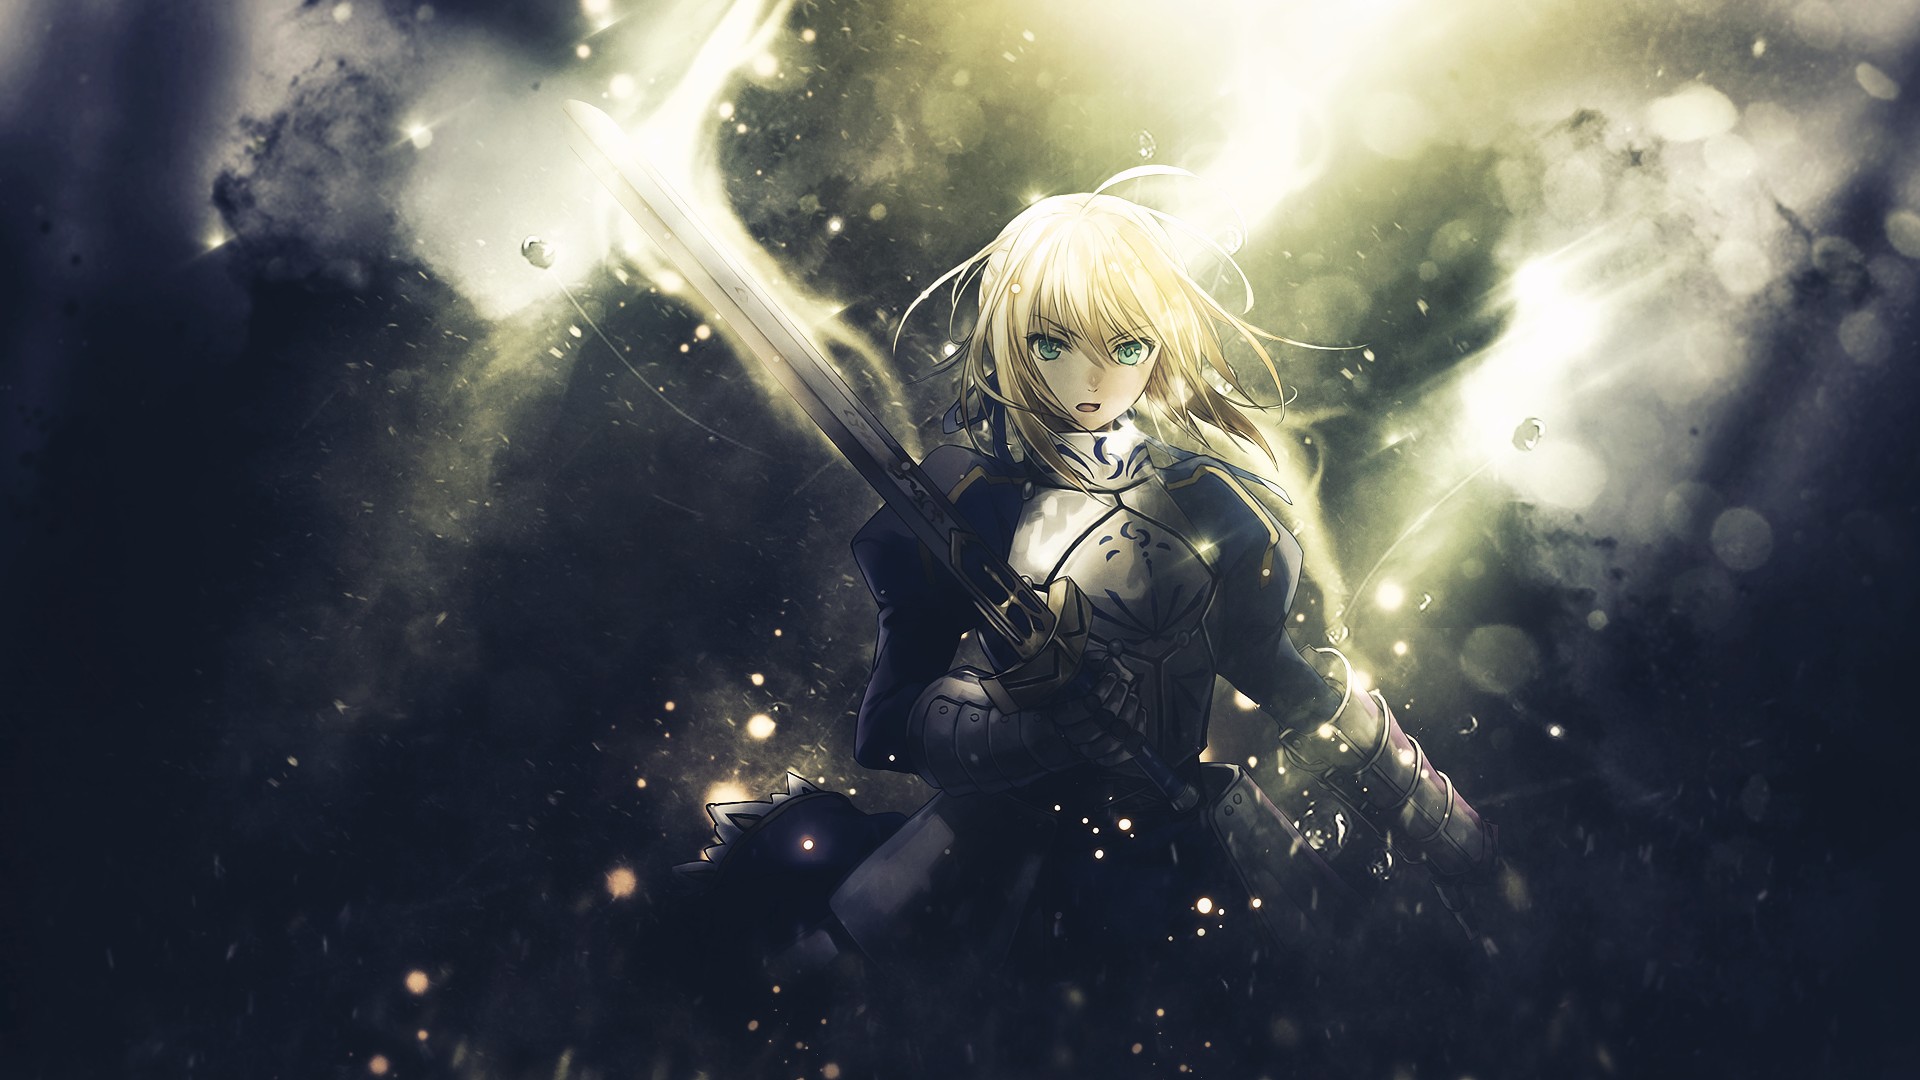 Fate Zero Wallpaper Download Free High Resolution Backgrounds For Desktop Mobile Laptop In Any Resolution Desktop Android Iphone Ipad 19x1080 3x480 1680x1050 1280x900 Etc Wallpapertag